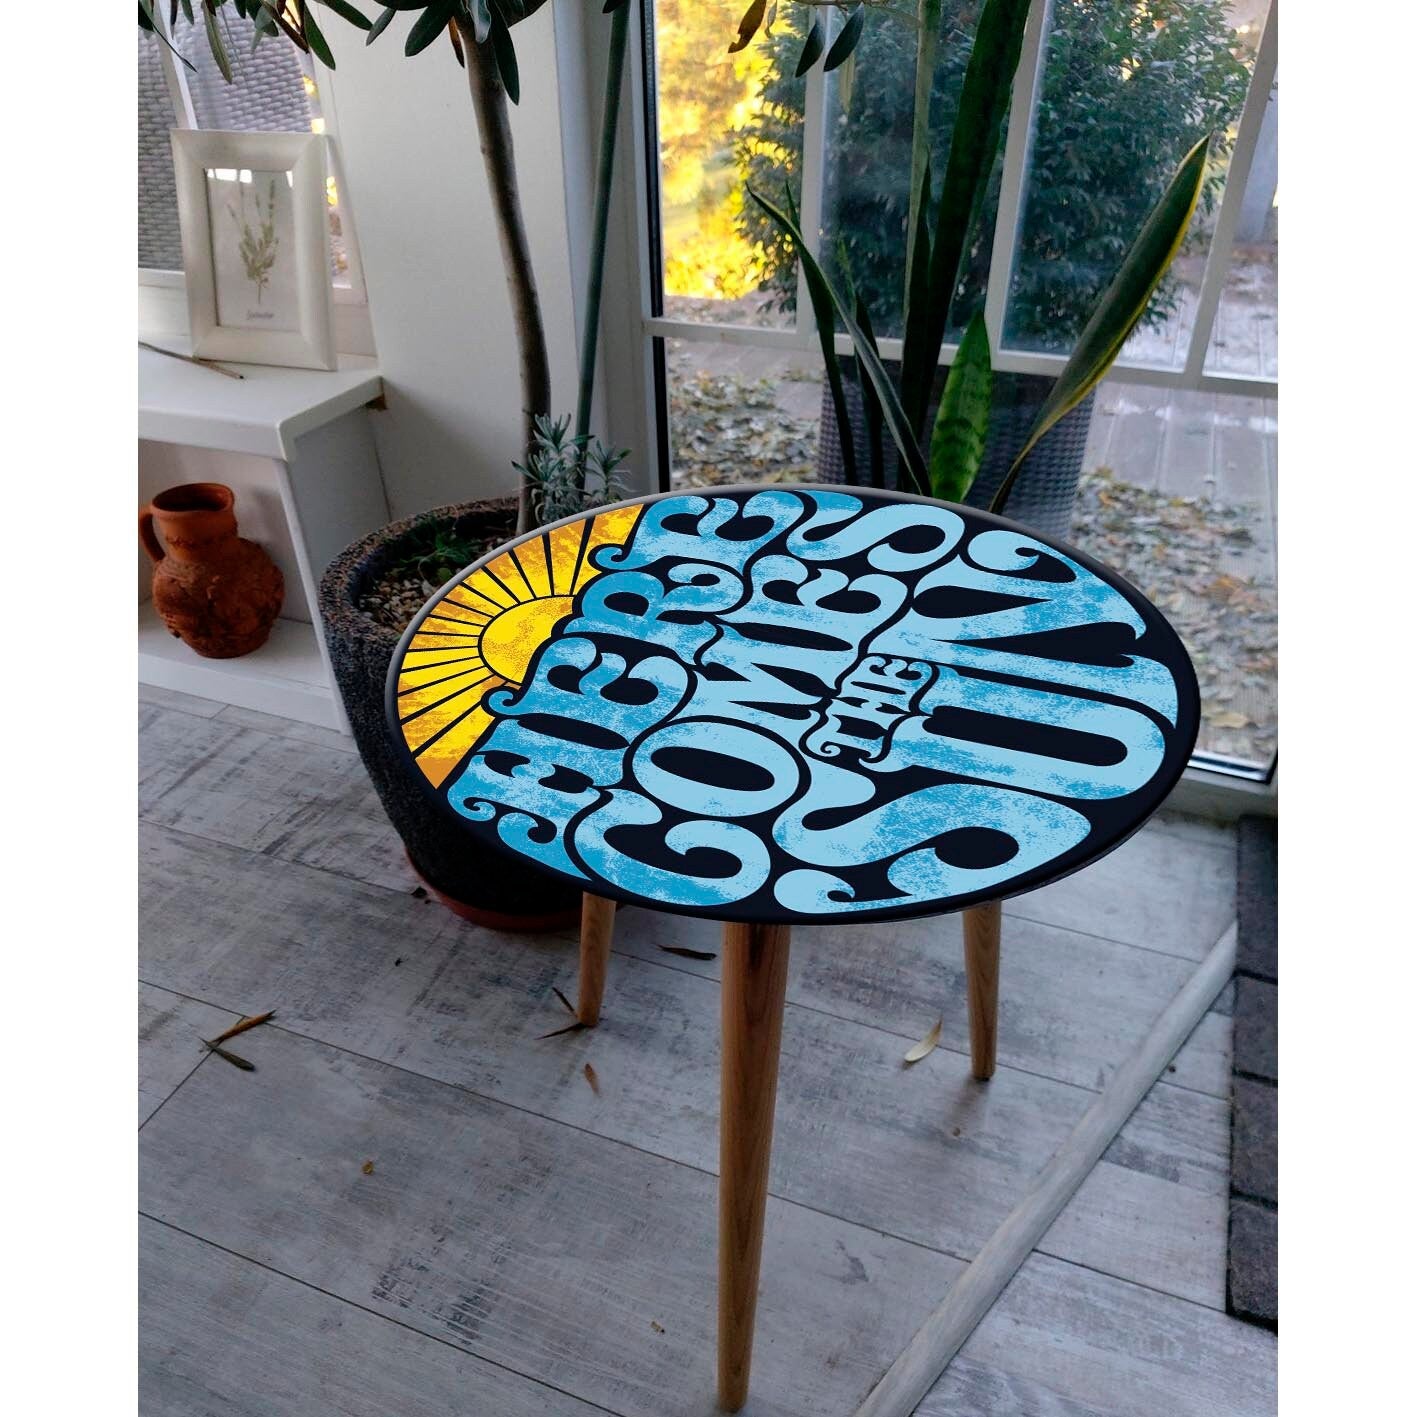 20" Tabletop with text vintage pattern